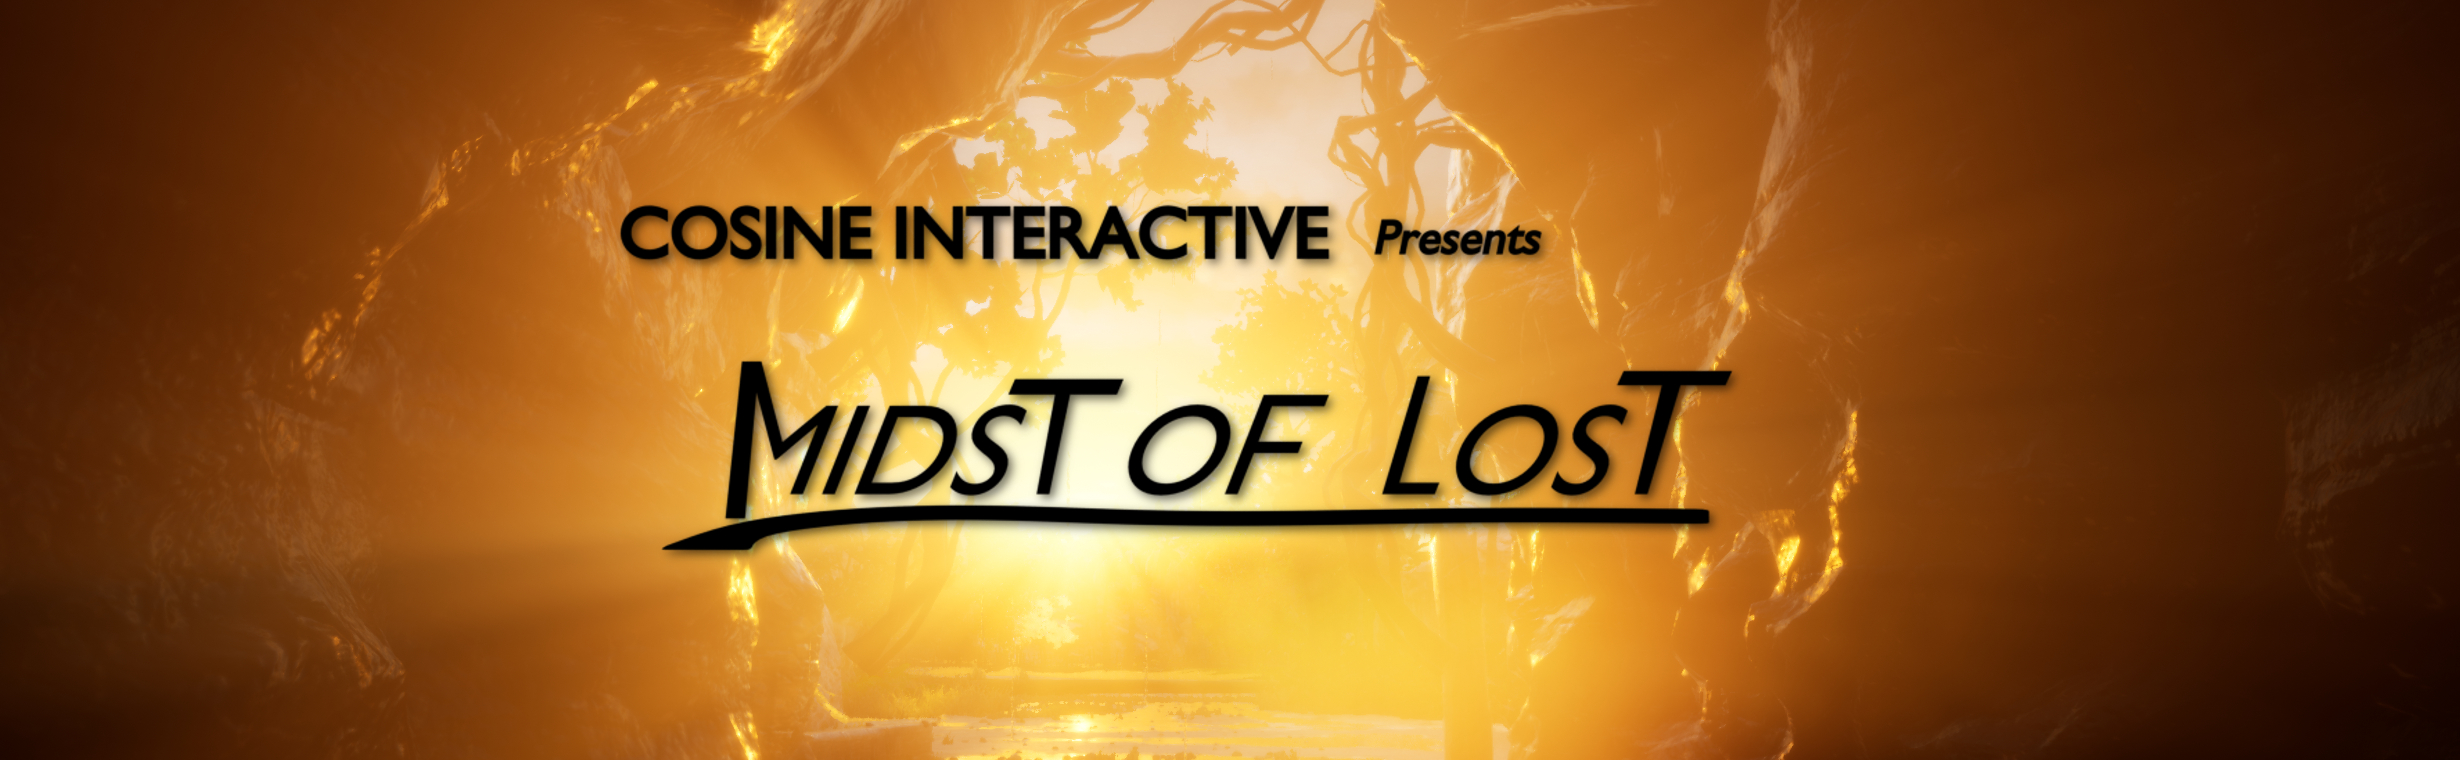 Midst of Lost